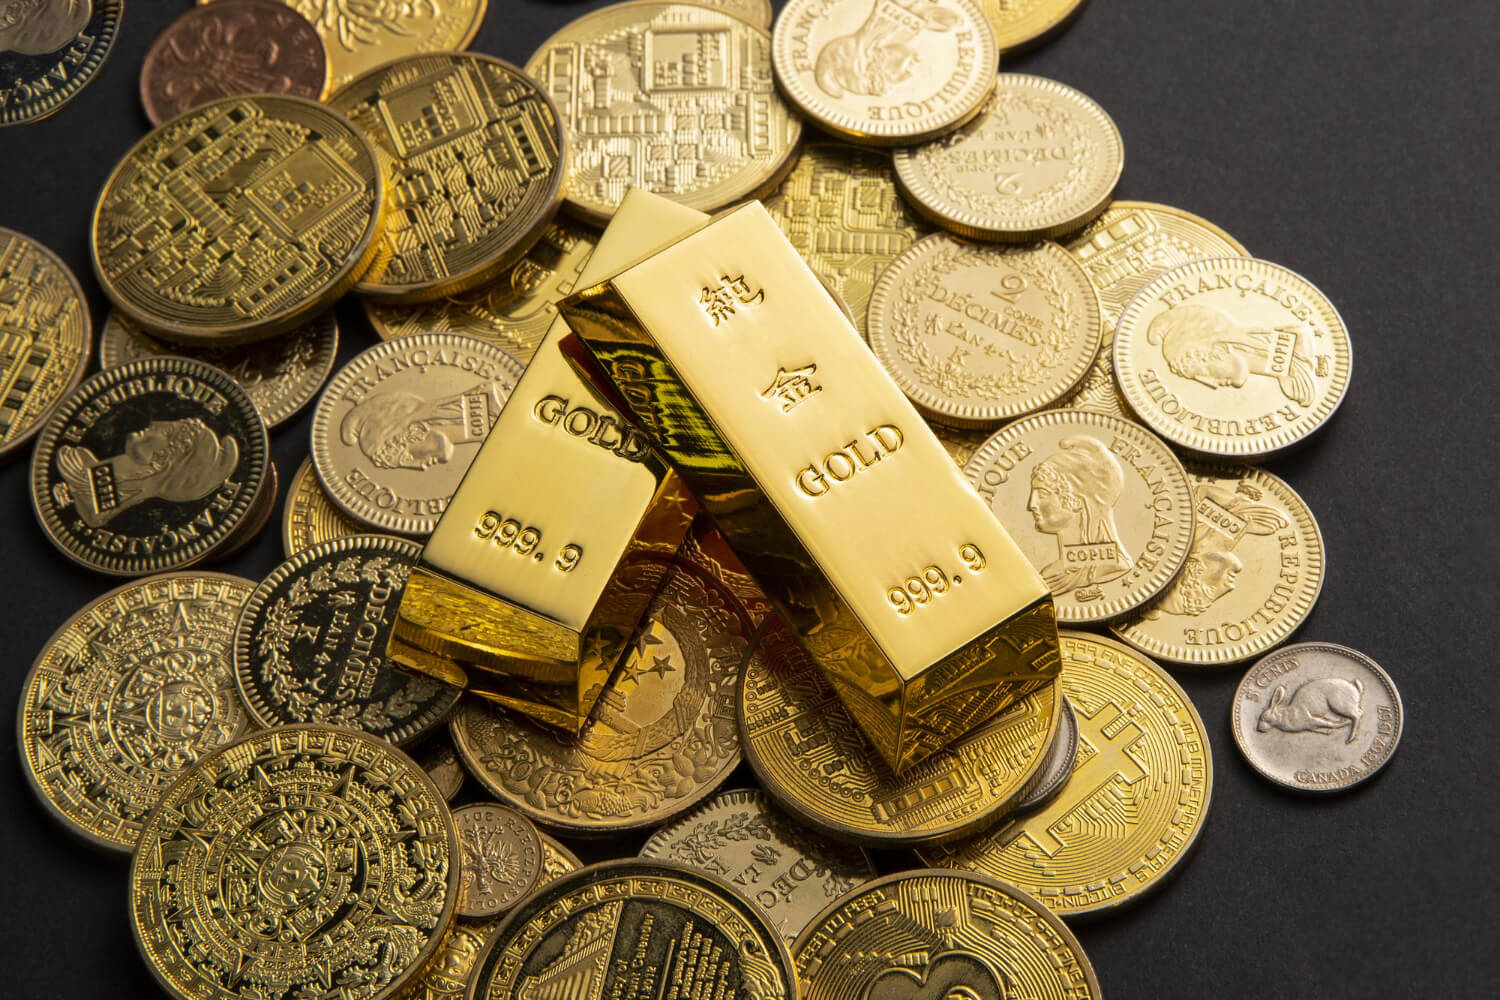 Comprehensive Analysis of Gold Market Trends and Price Movements